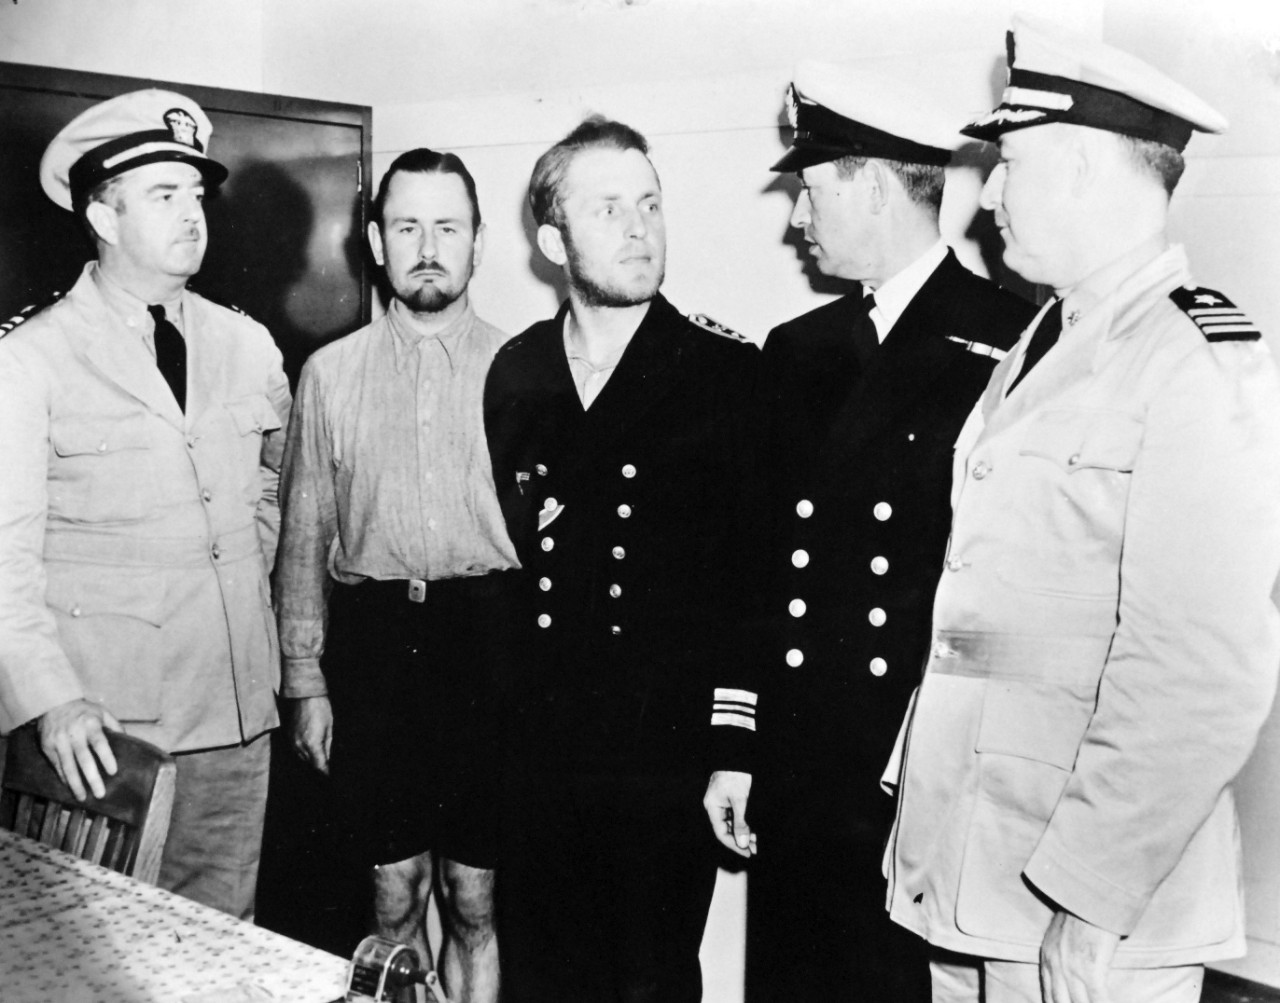 26-G-51543(4): German U-boat, U-352, May 1942.    German Officers, center, ignoring a British officer, continue their conversation at Charleston Navy Yard, South Carolina.  Their submarine was sunk by USCGC Icarus (WPC-110), May 9, 1942 Official U.S. Coast Guard Photograph, now in the collections of the National Archives.  (2017/09/05).